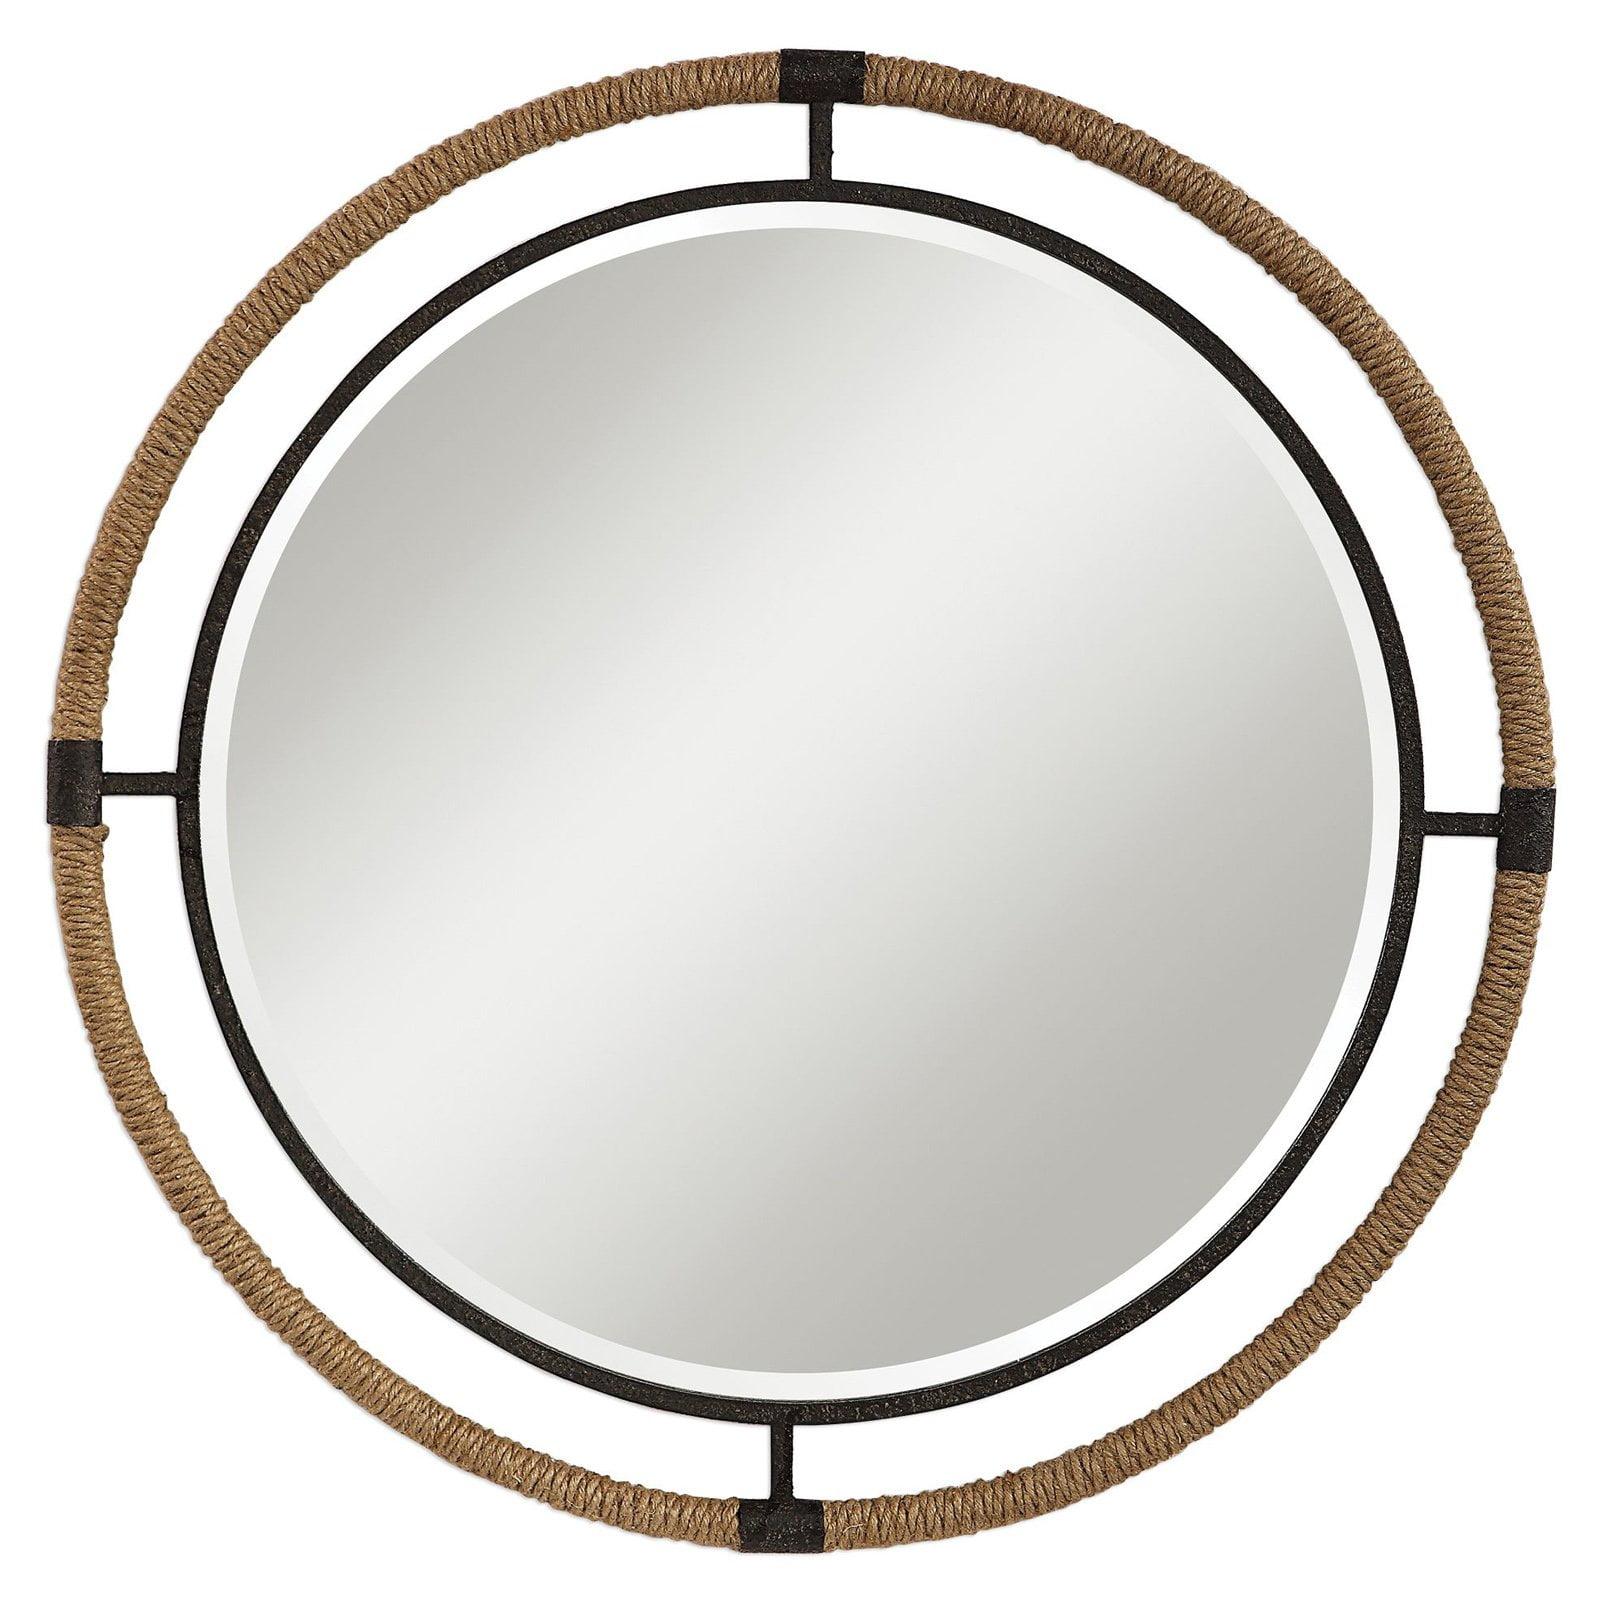 Melville Rustic 29.5" Round Mirror with Natural Rope Accent